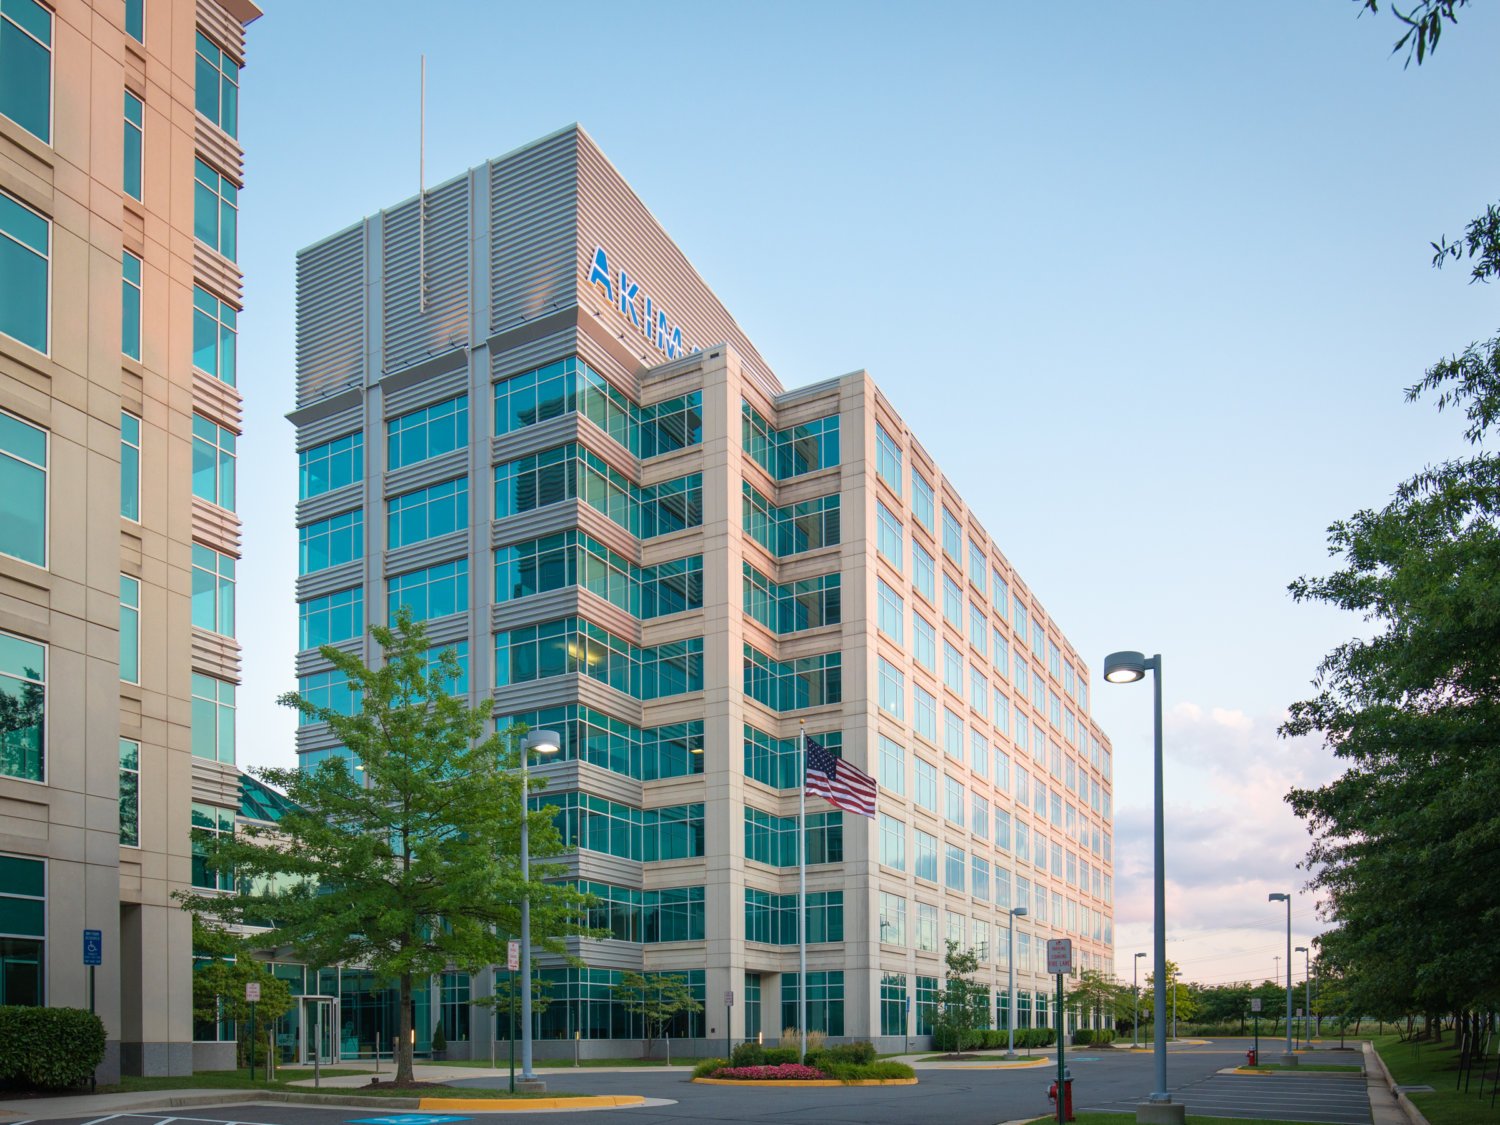 A view of Akima’s headquarters in Herndon, Virginia.